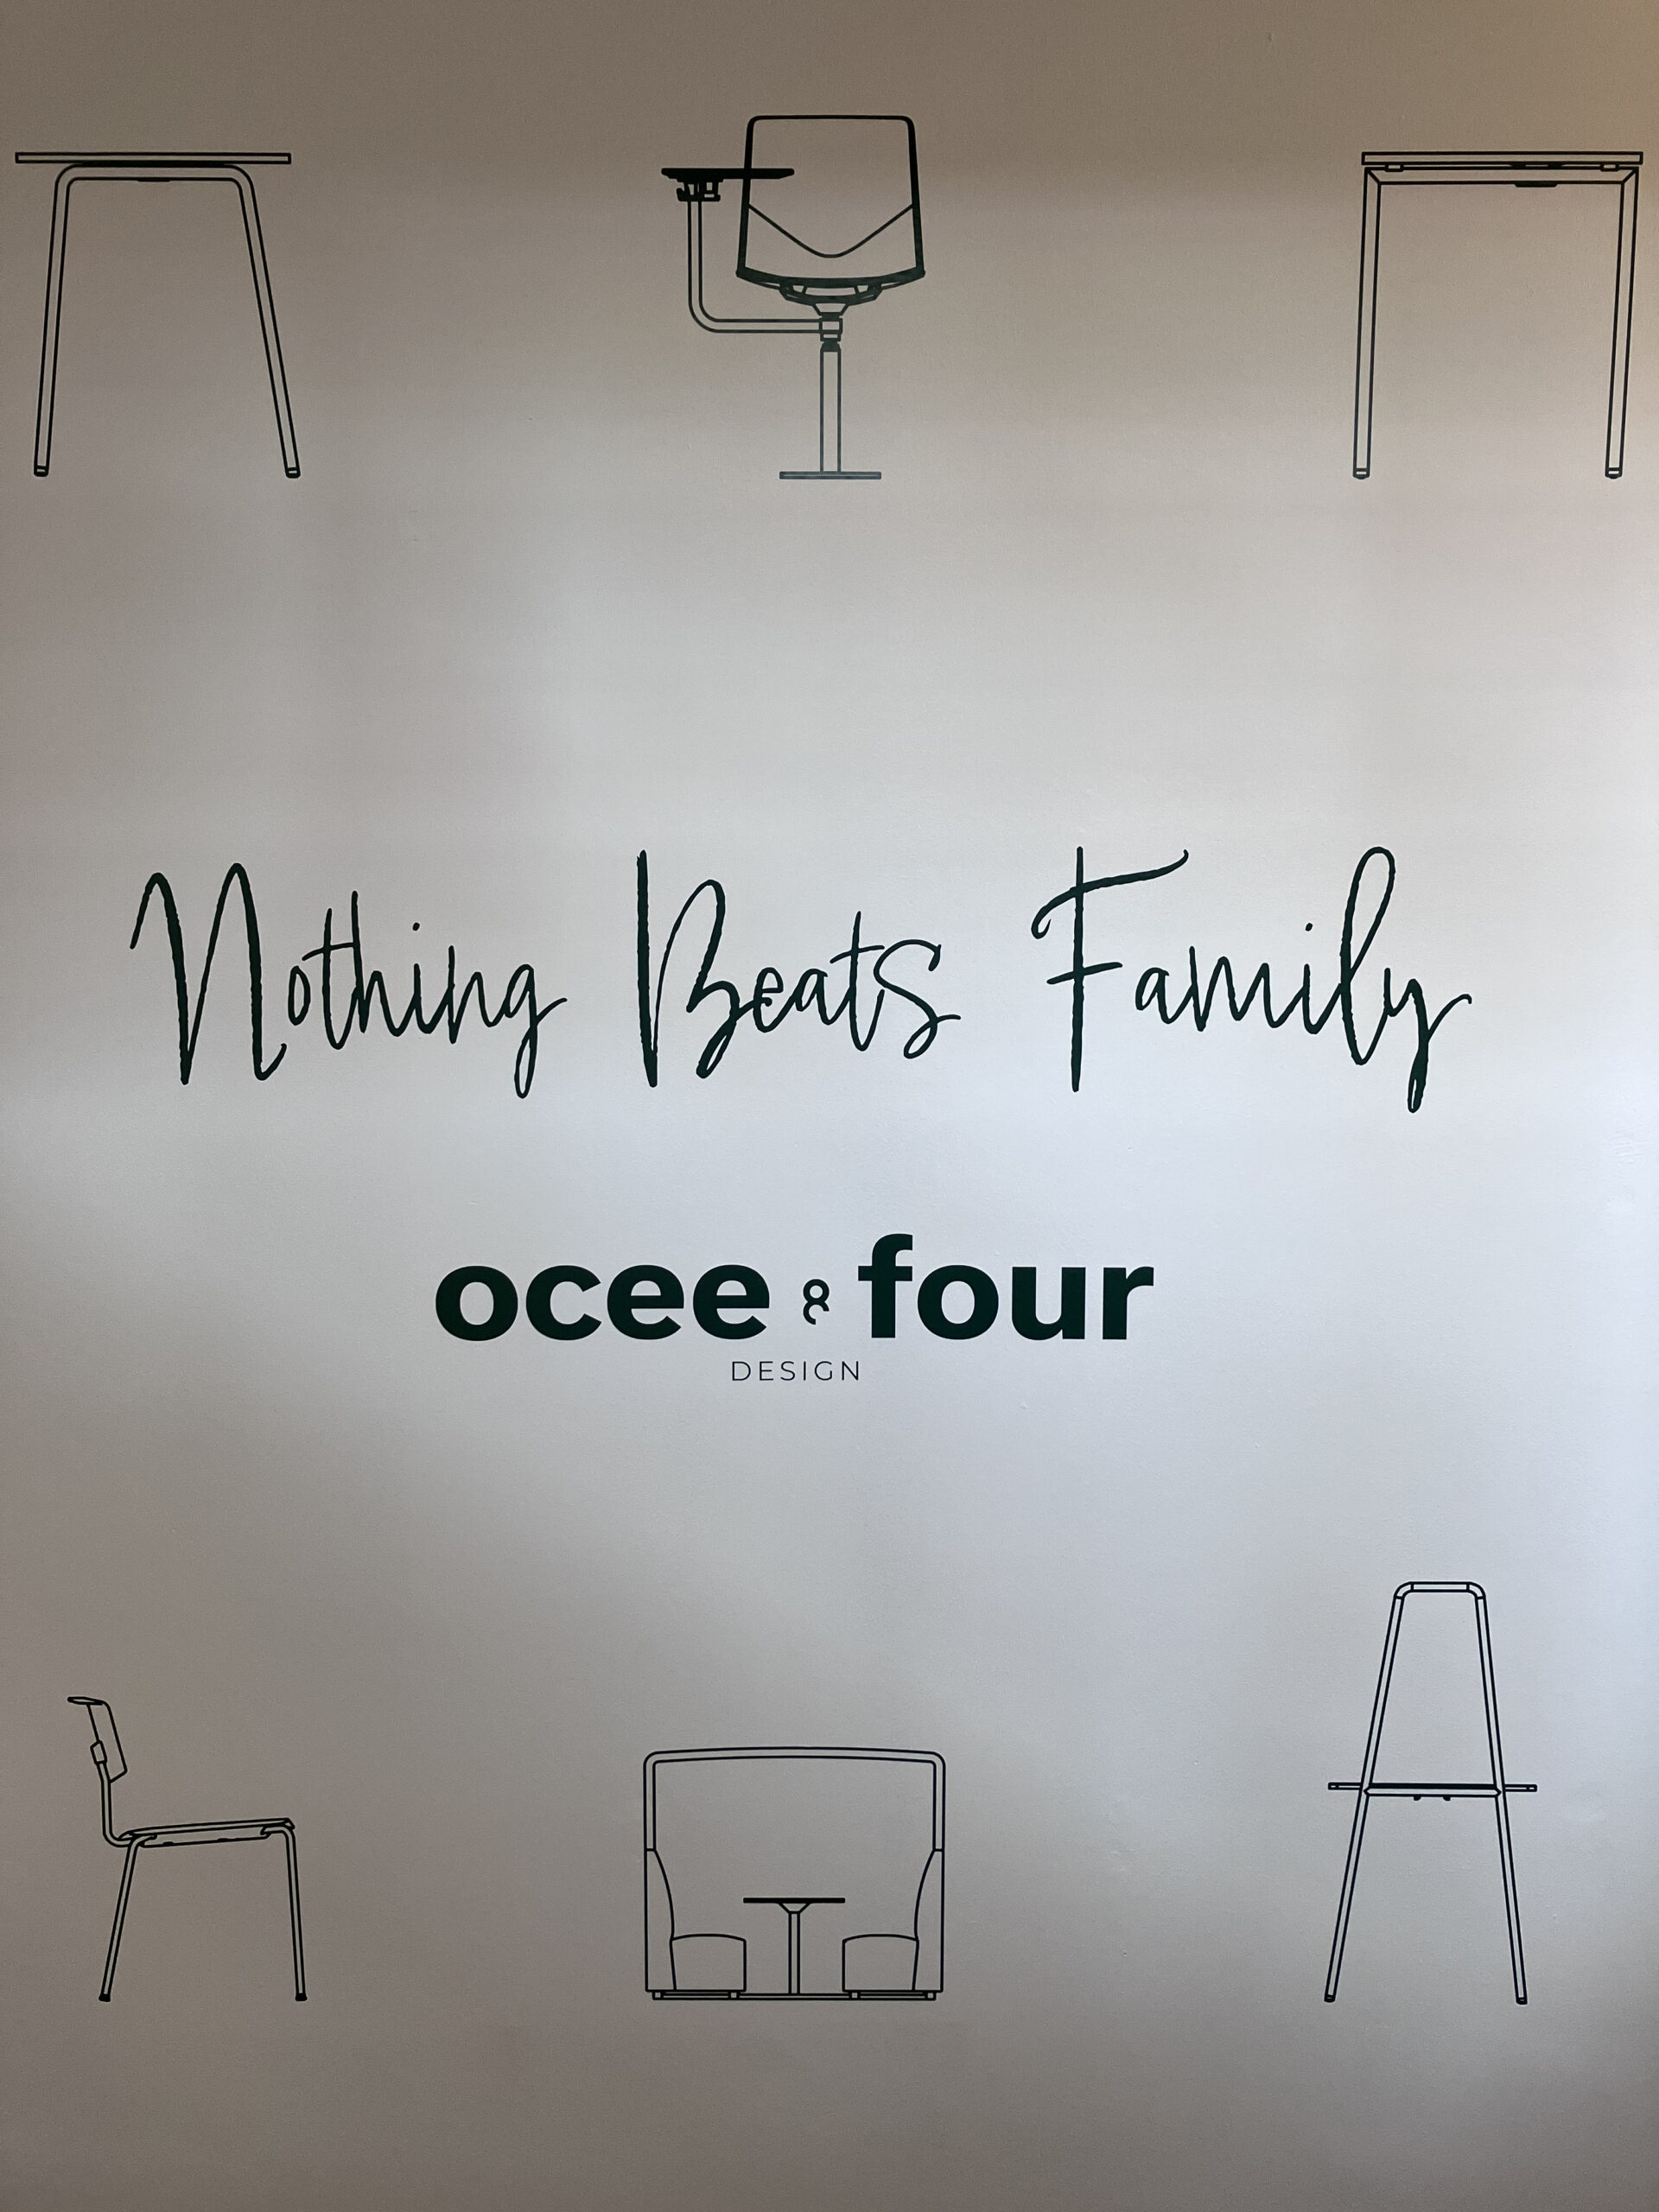 Brand Identity at our London Showroom - Nothing beats family 